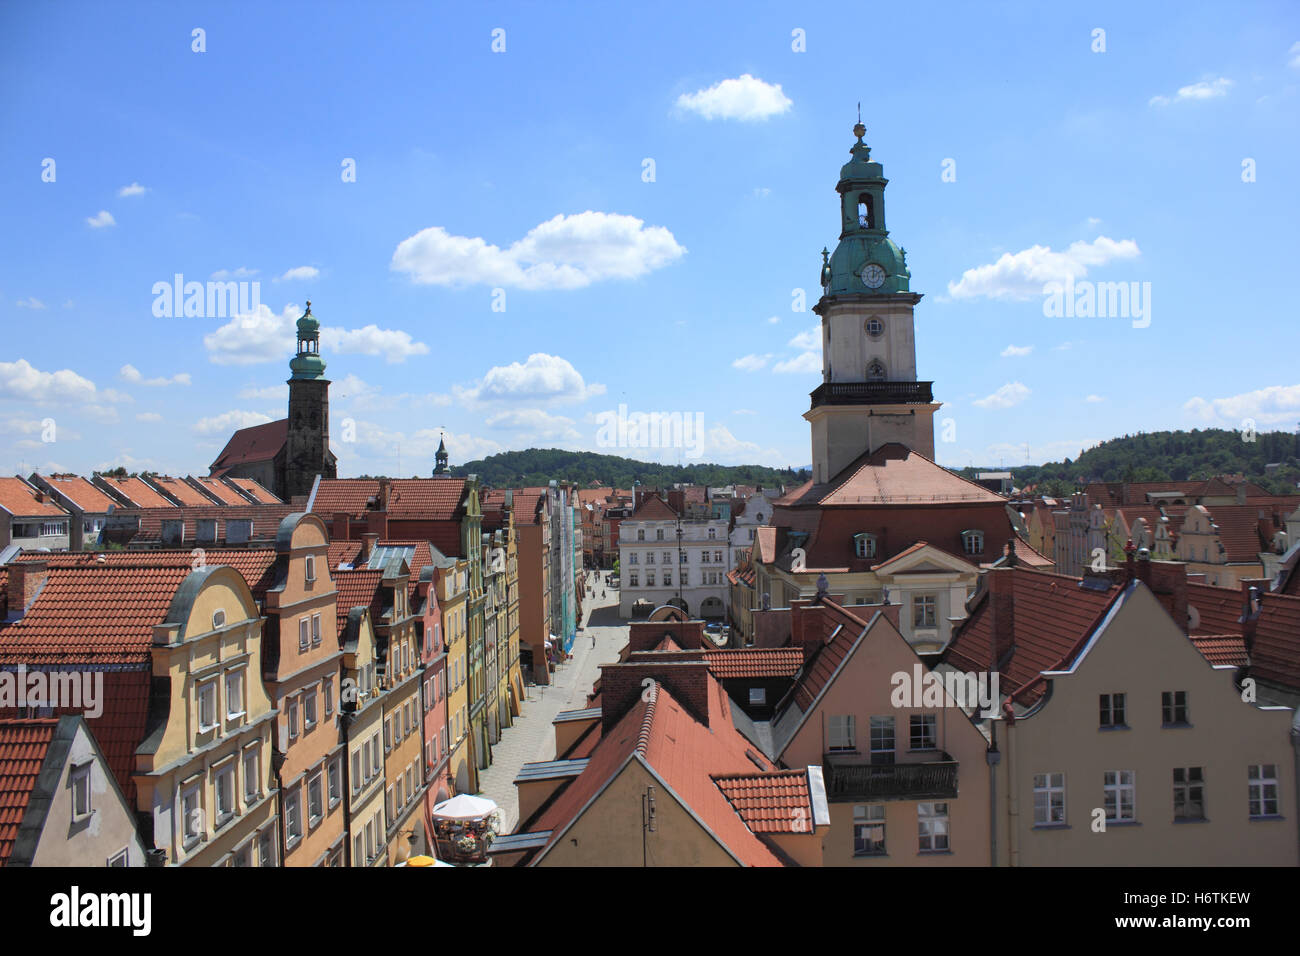 city, town, style of construction, architecture, architectural style, poland, Stock Photo